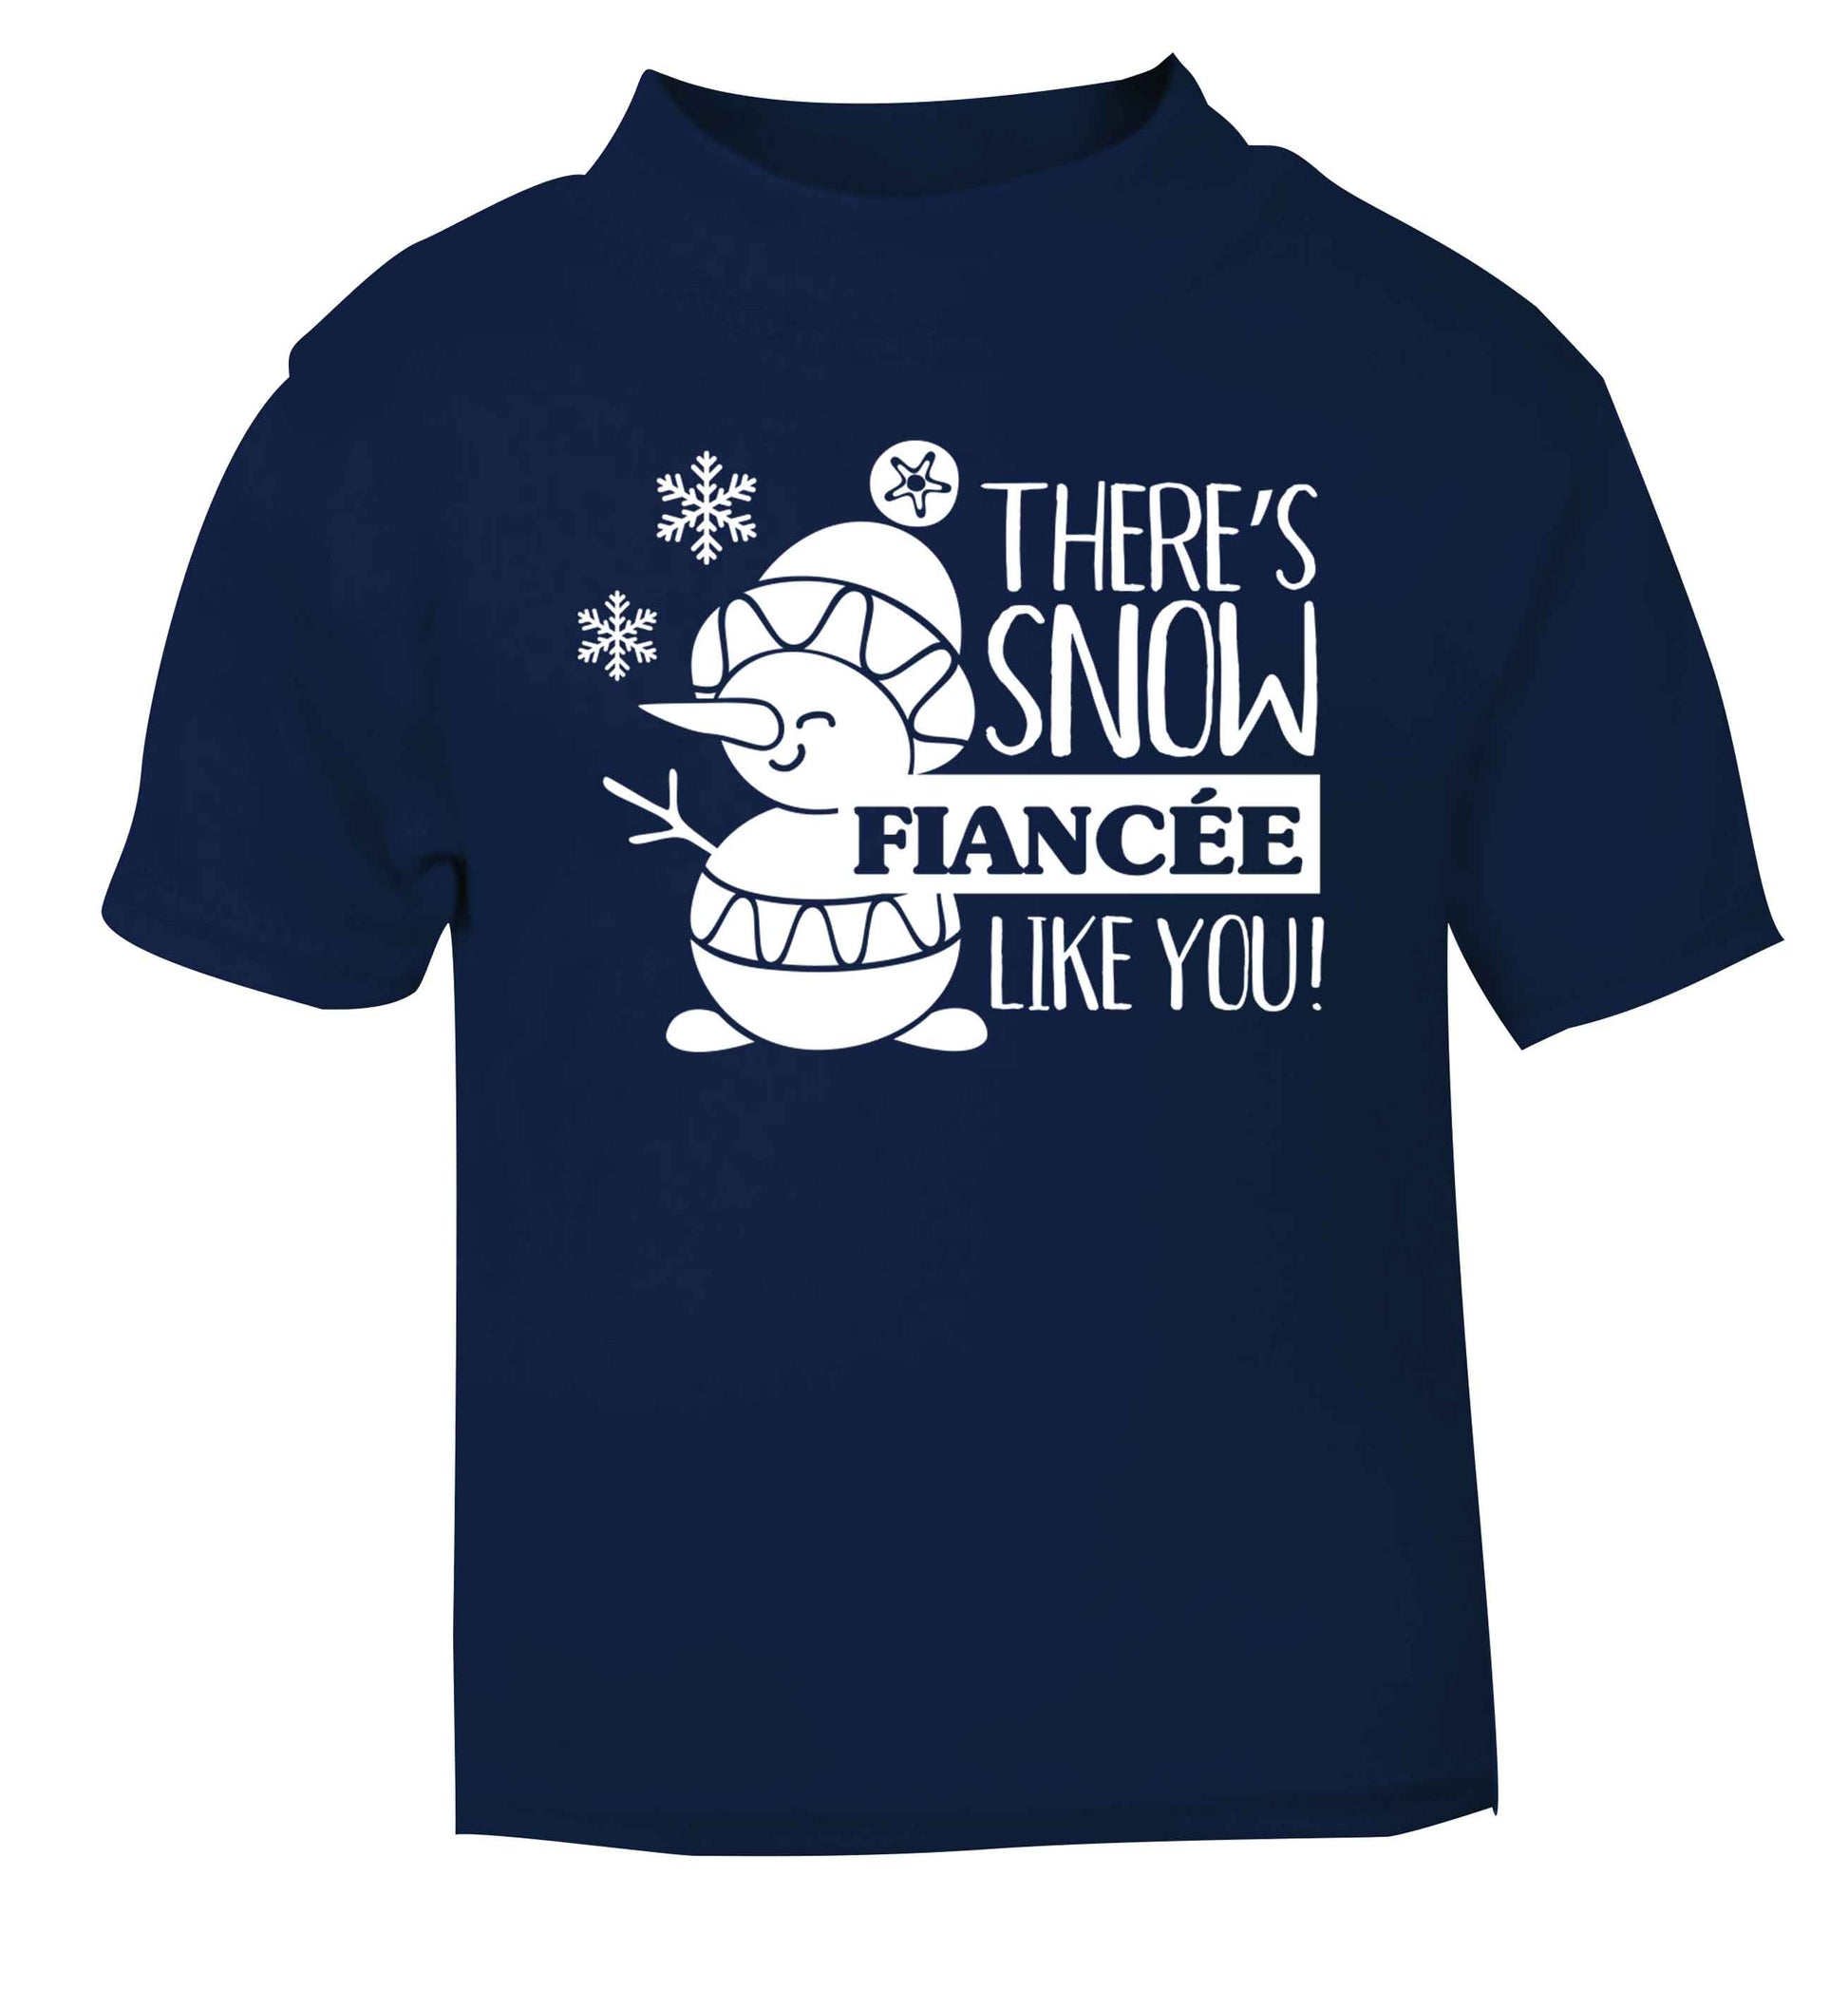 There's snow fiancee like you navy baby toddler Tshirt 2 Years